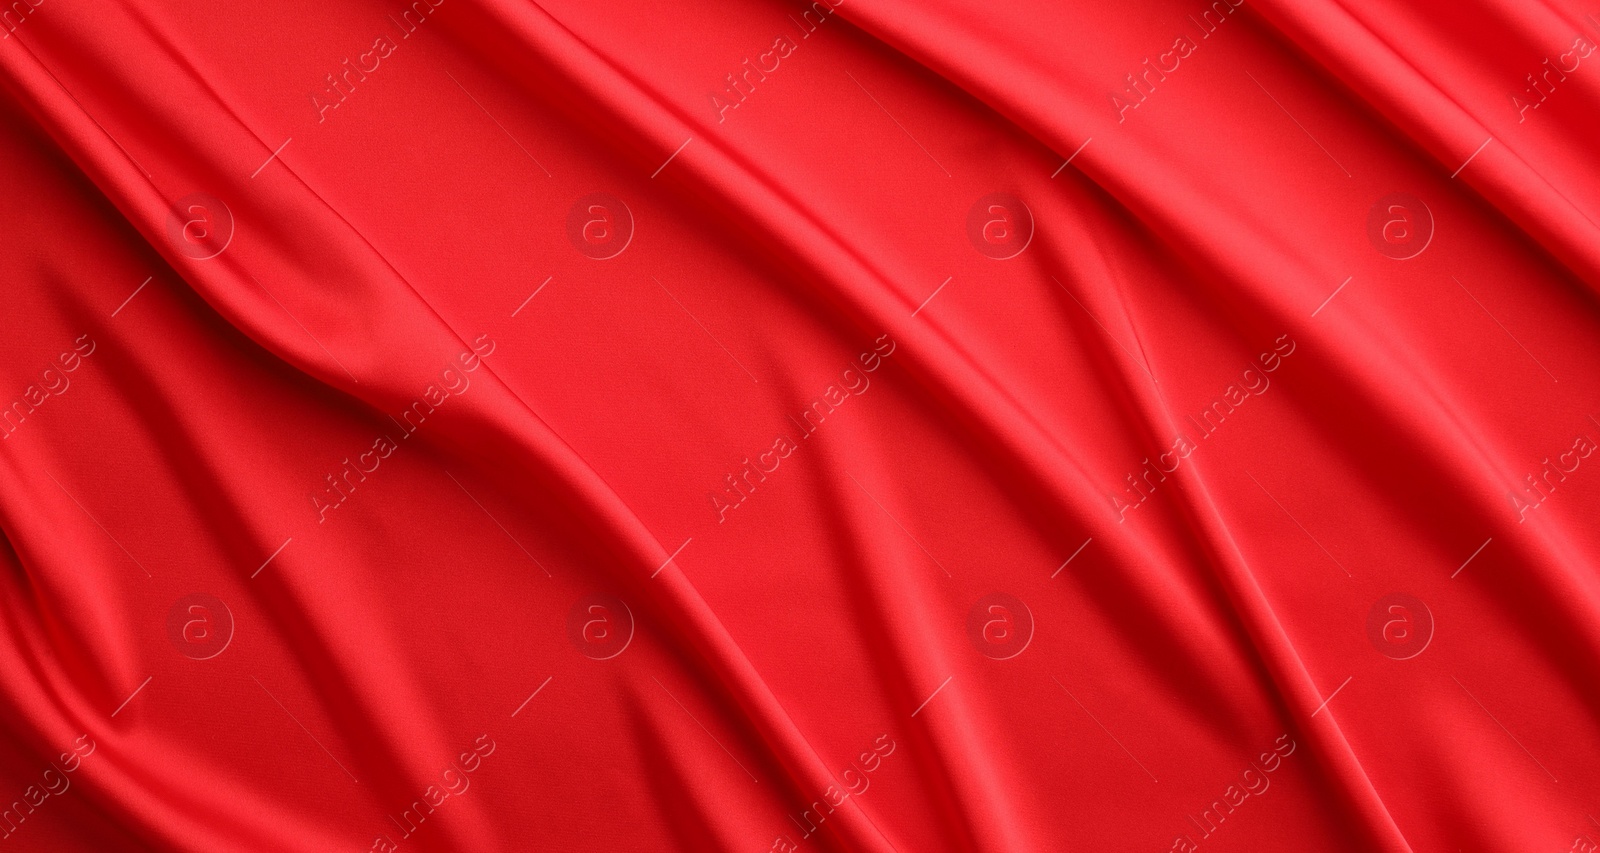 Photo of Crumpled red silk fabric as background, top view